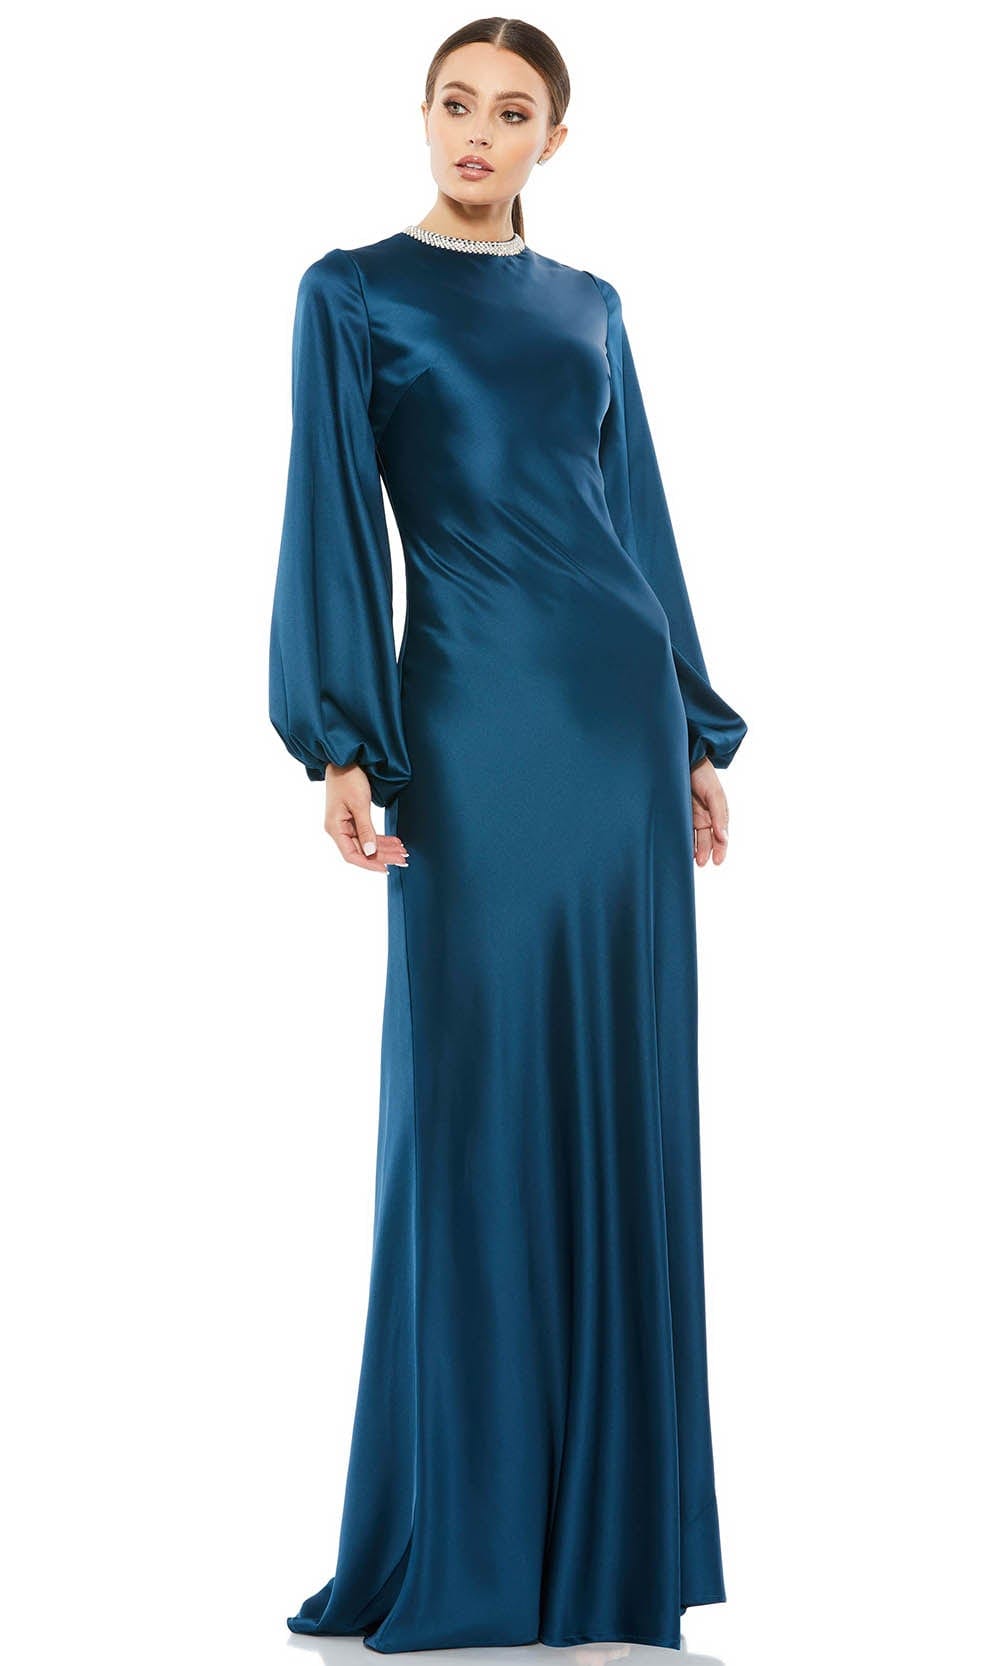 Image of Ieena Duggal 26575 - Bishop Sleeve Satin Evening Gown | Couture Candy